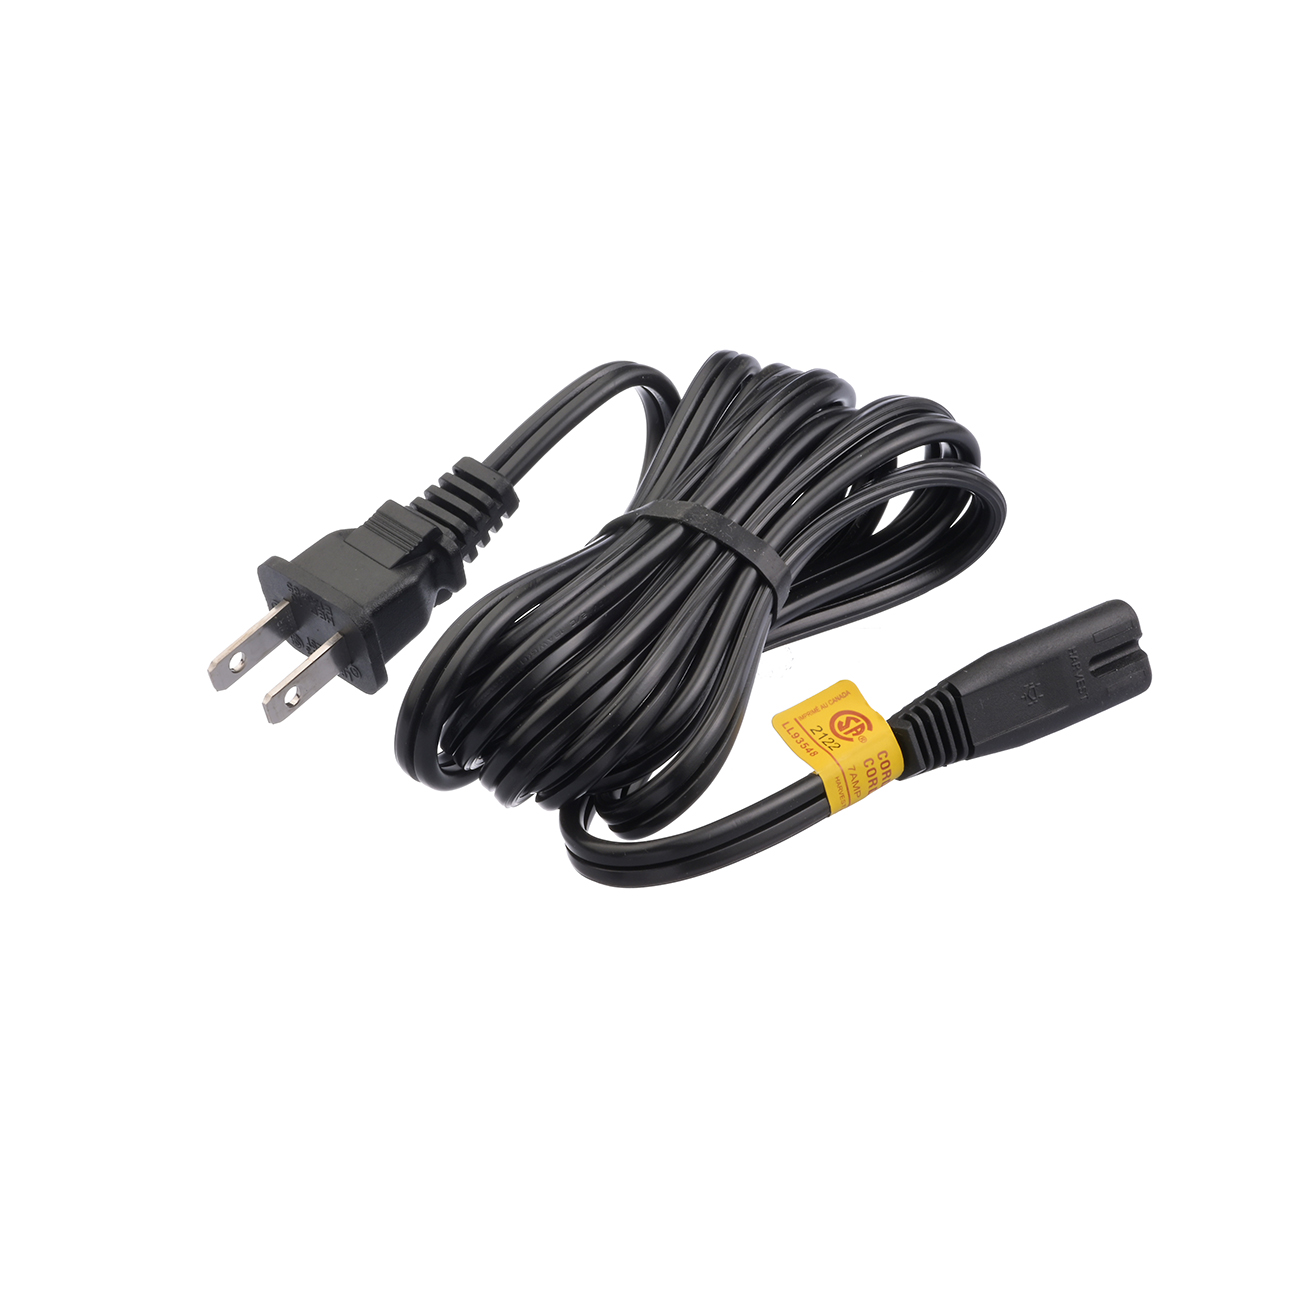 Mains cable -US, 2m